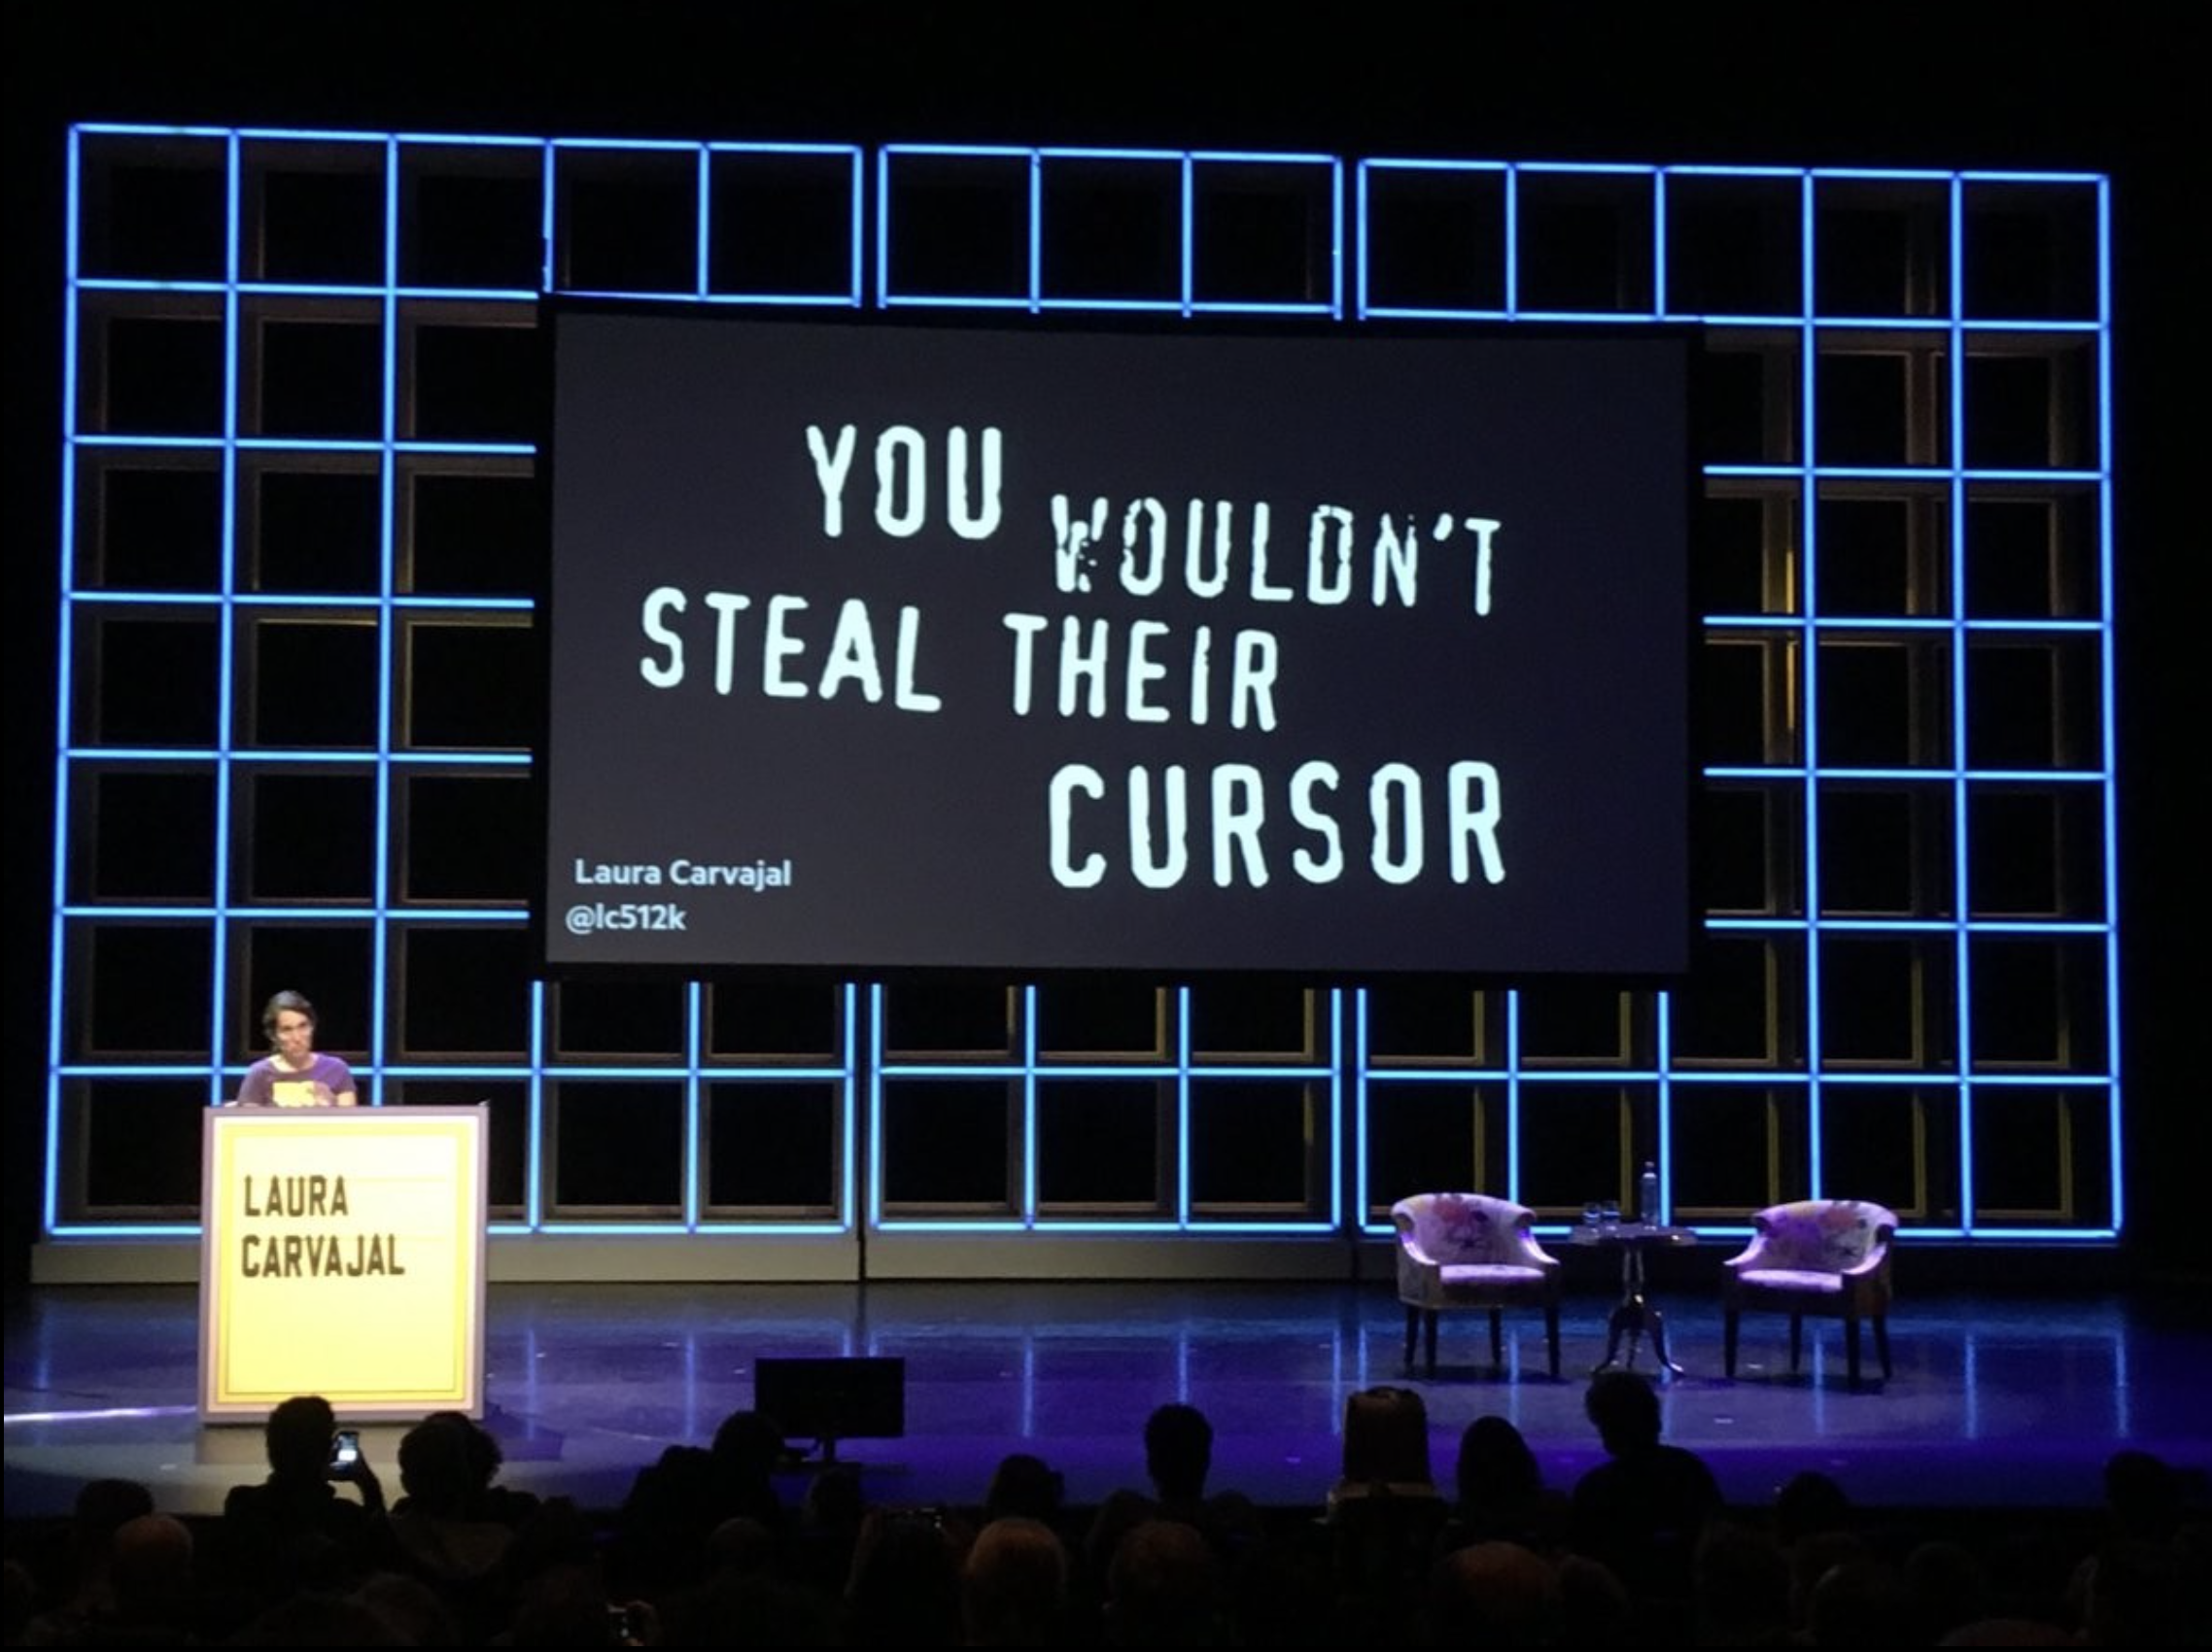 Laura Carvajal on stage at Fronteers 2018, with a slide on screen behind her that says 'You wouldn't steal their cursor'